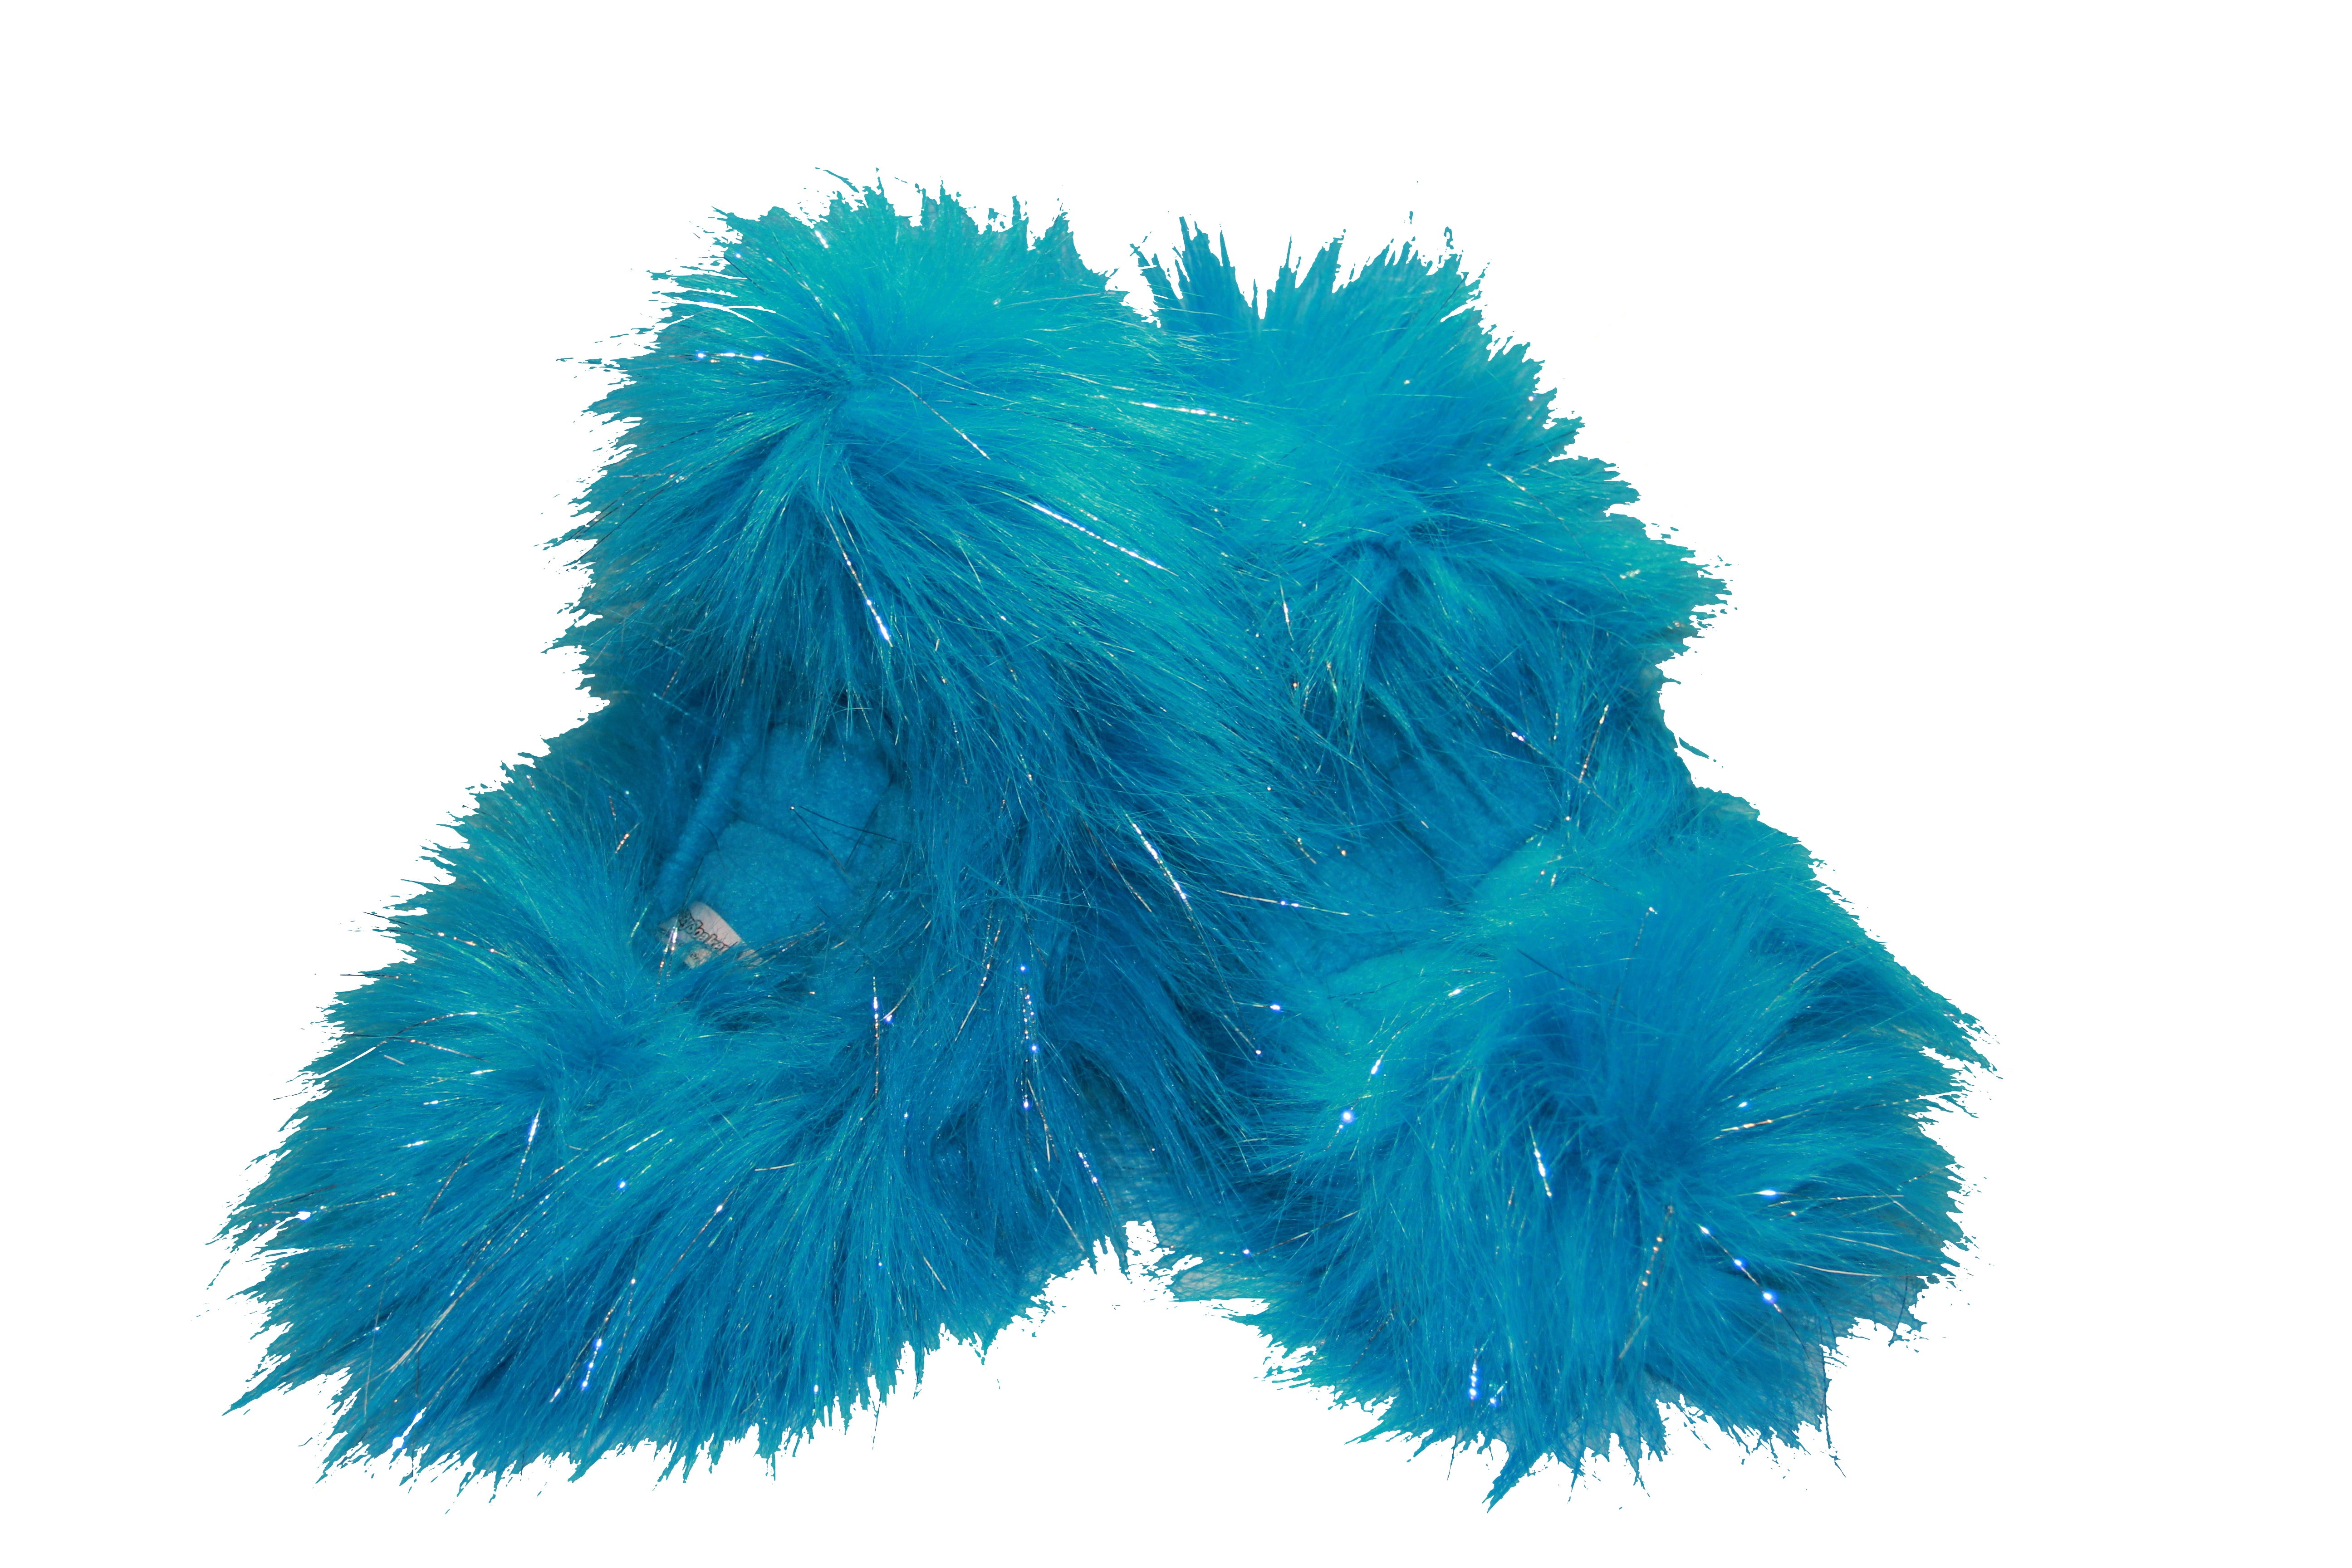 Fuzzy Soakers Fur Skate Blade Covers